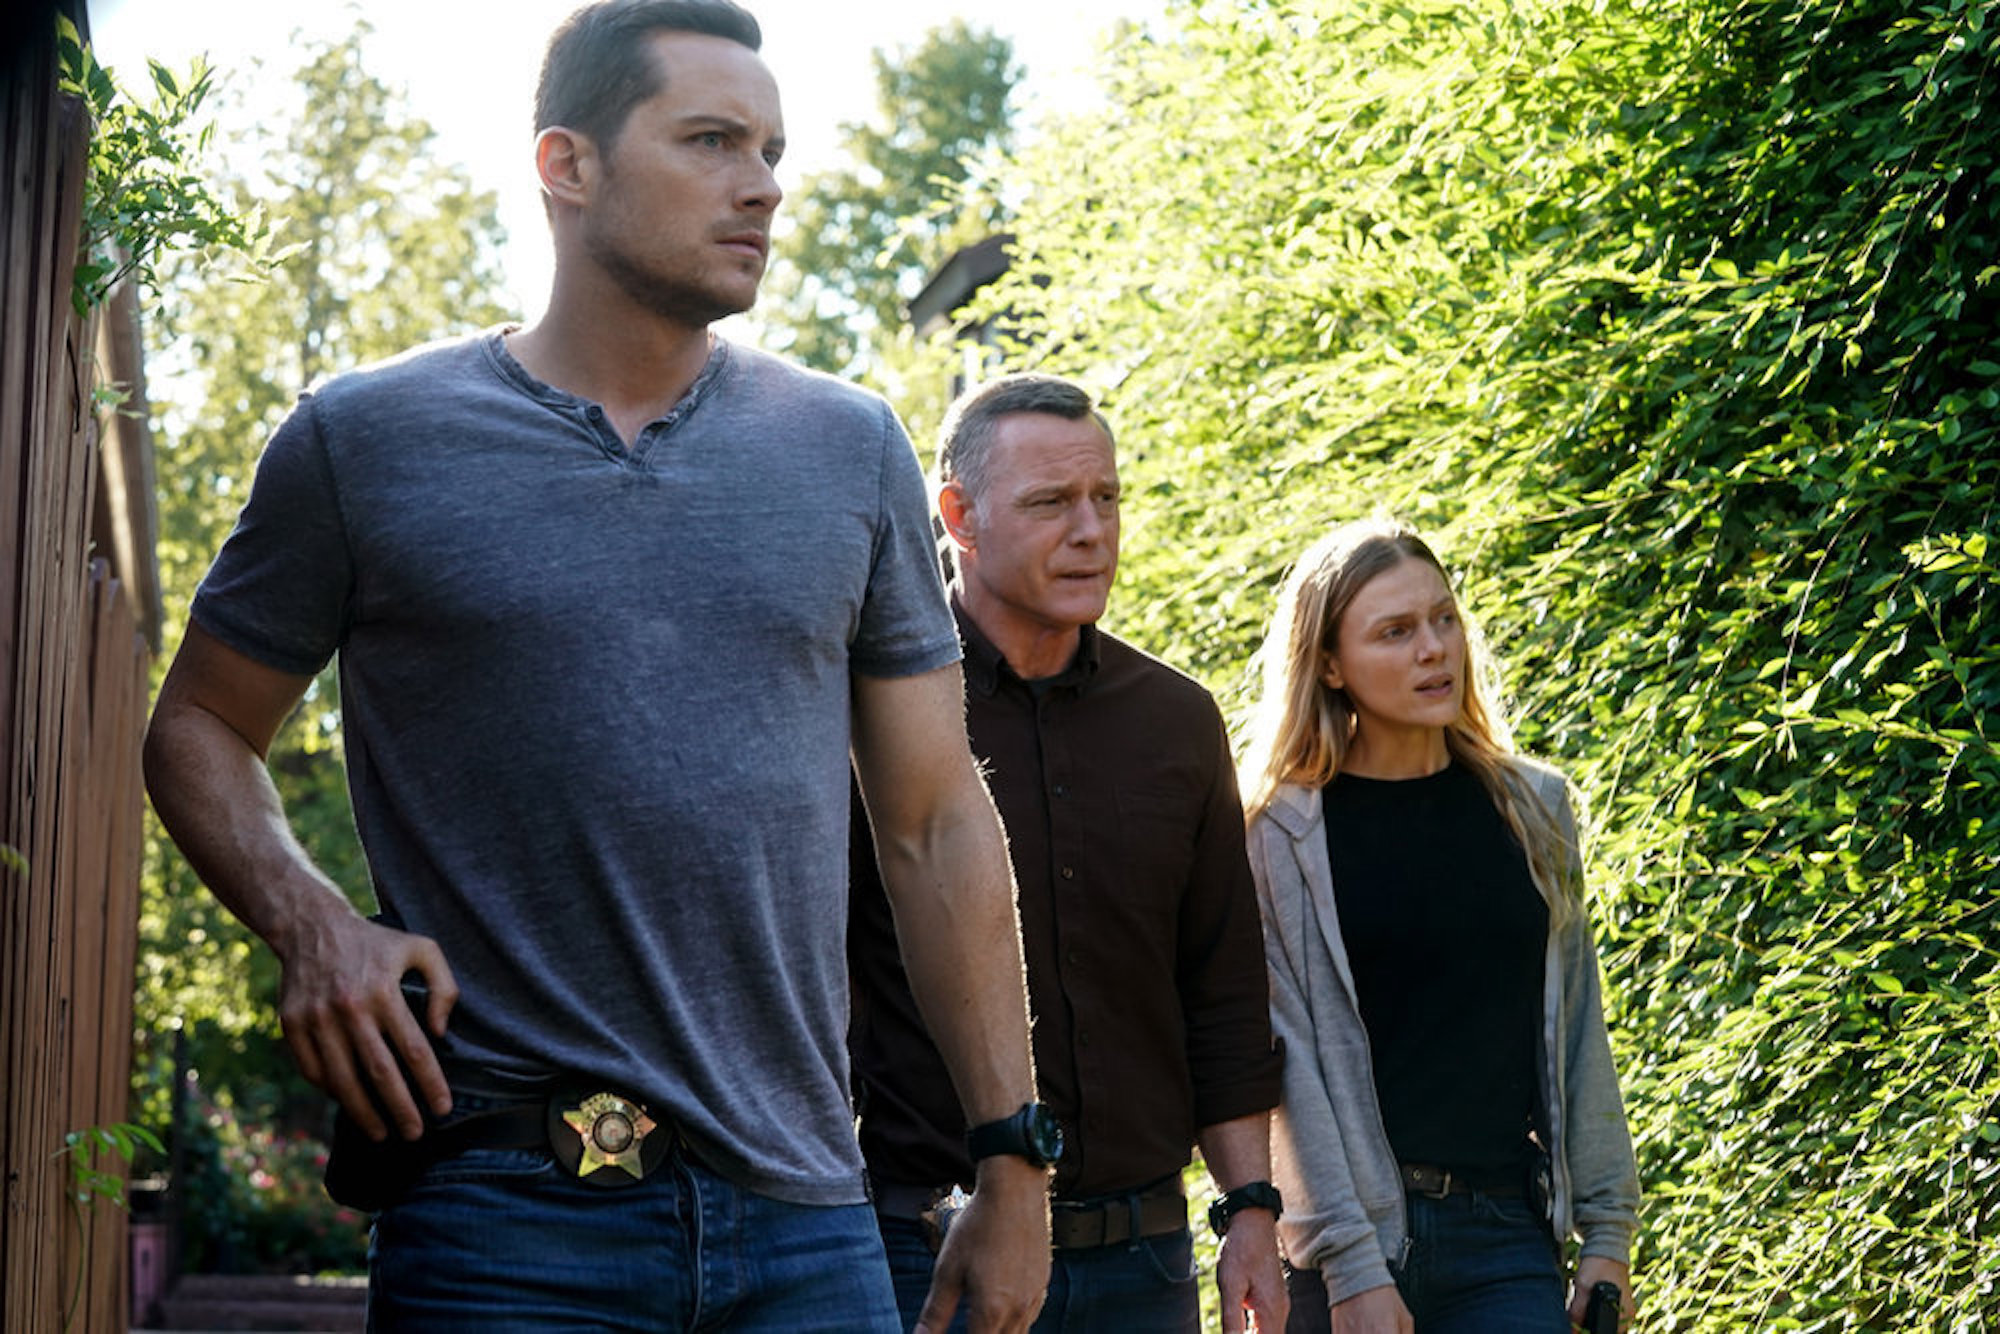 Jay Halstead, Hailey Upton, and Hank Voight in 'Chicago P.D.' Season 9 Episode 4. 'Chicago P.D.' Season 9 spoilers note Halstead confronts Voight about Roy's death